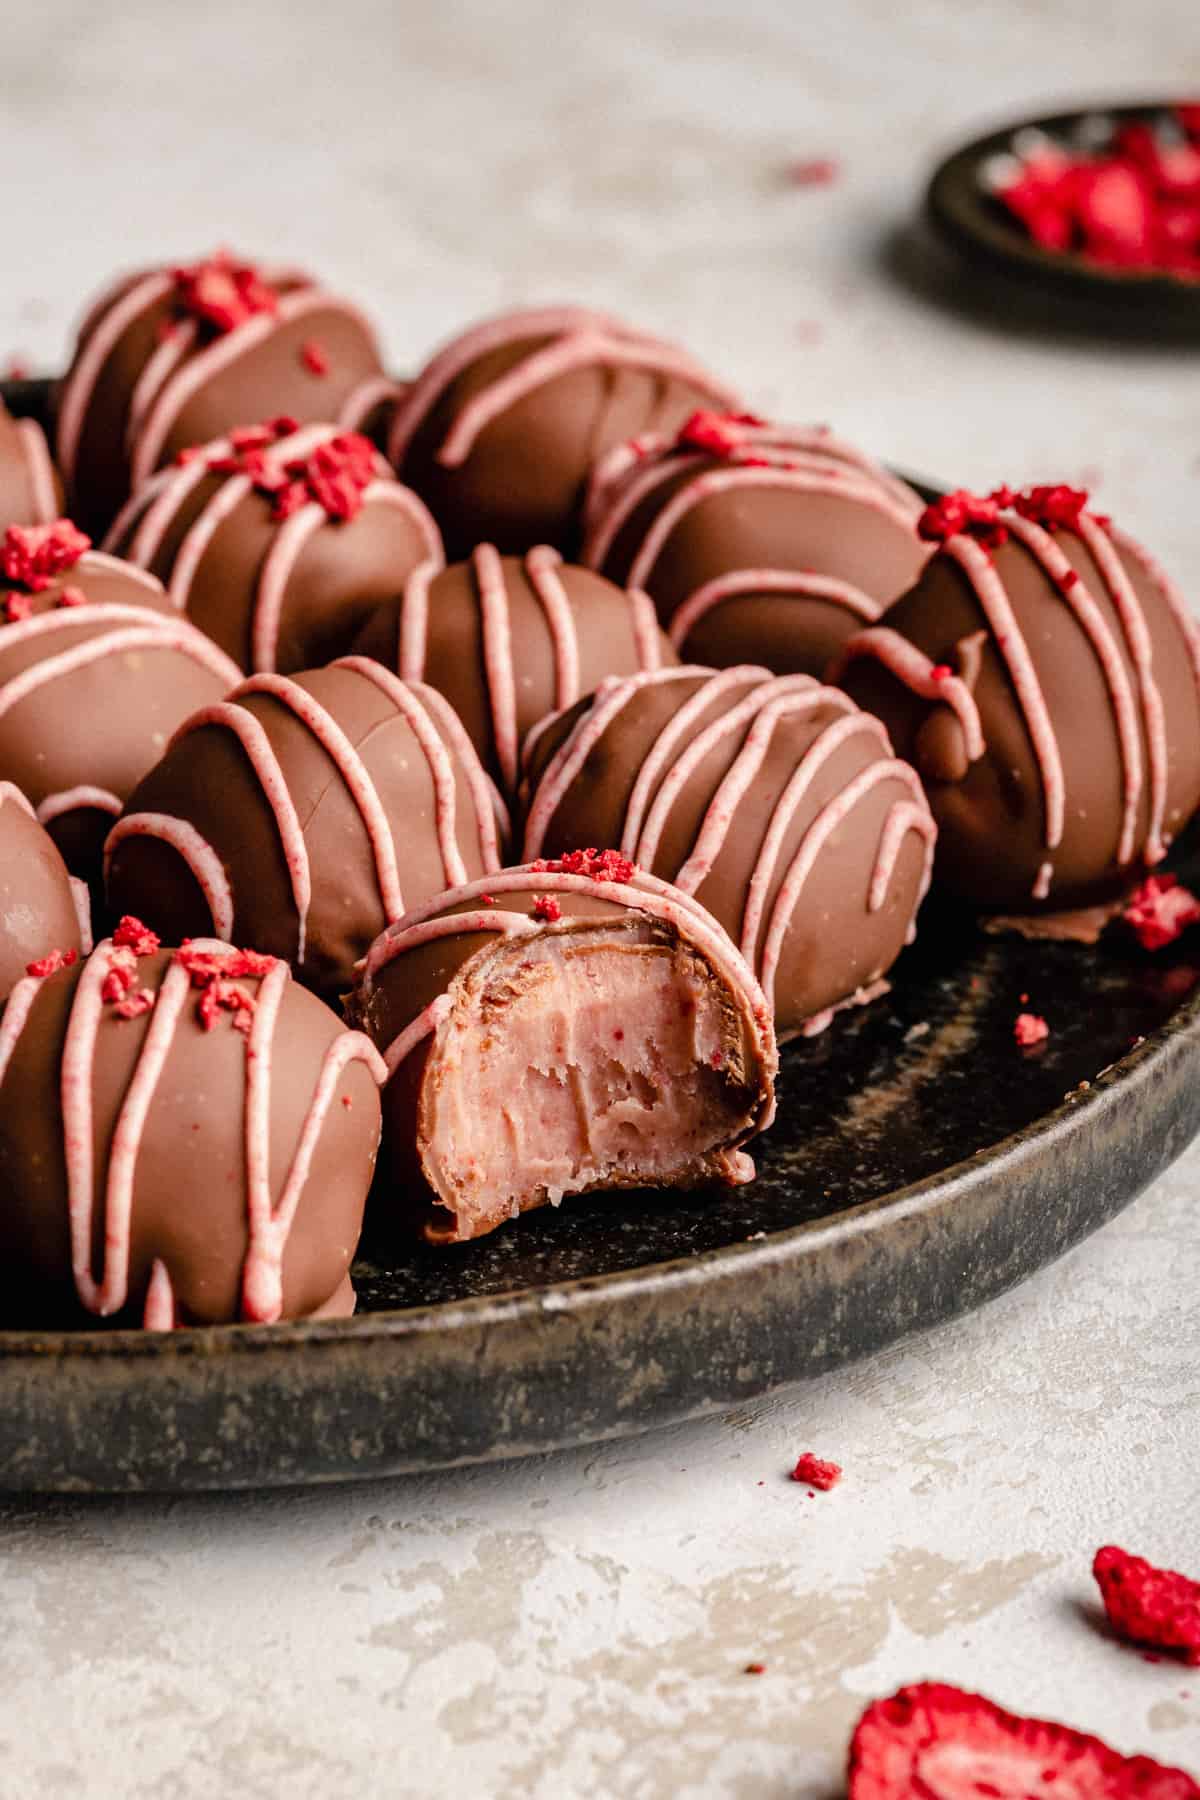 Strawberry truffles on a plate with one with a bite taken out showing the pink centre.